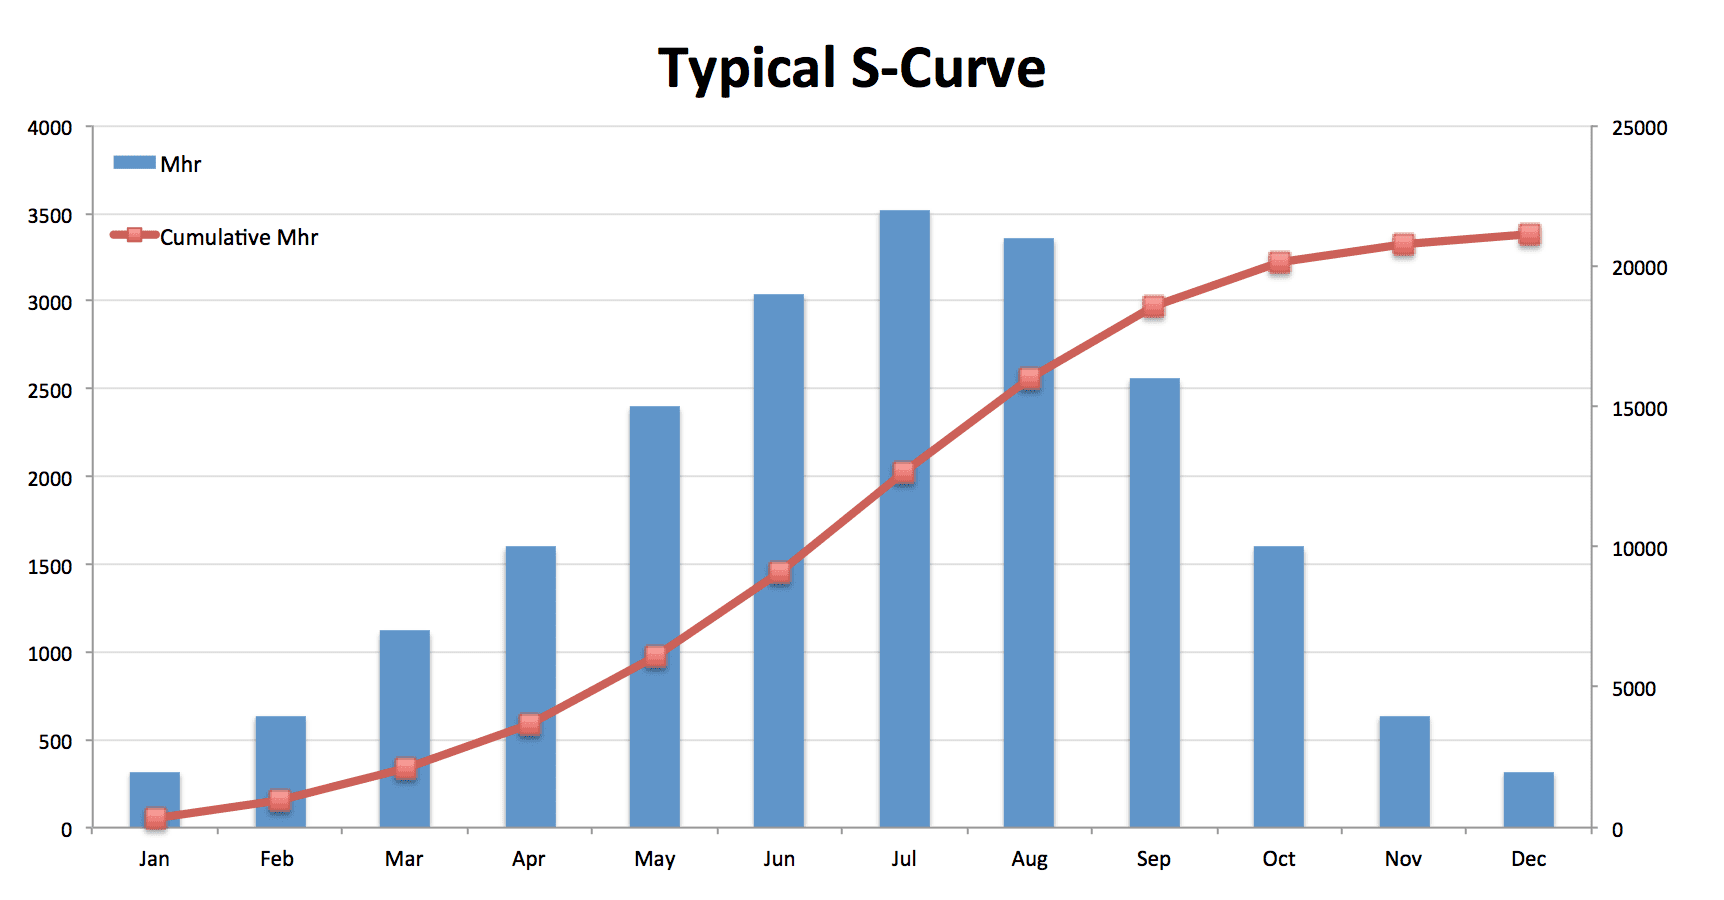 How steep are your curves?